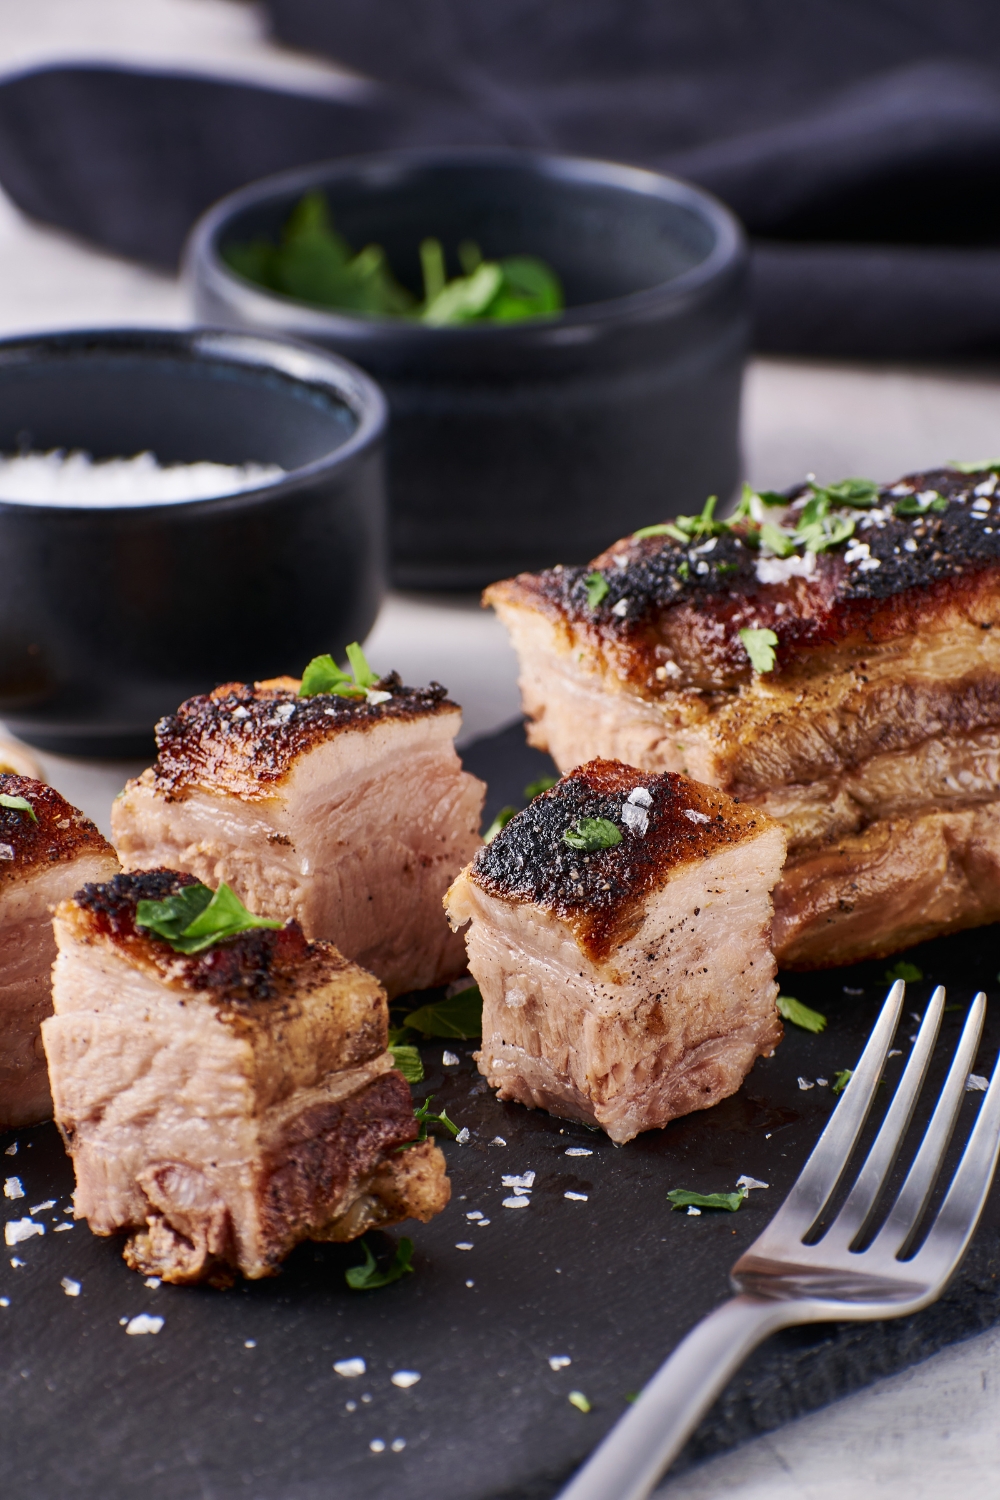 Cooked pork belly on a piece of black slate with a fork next to the pork. The pork is garnished with fresh herbs and salt.